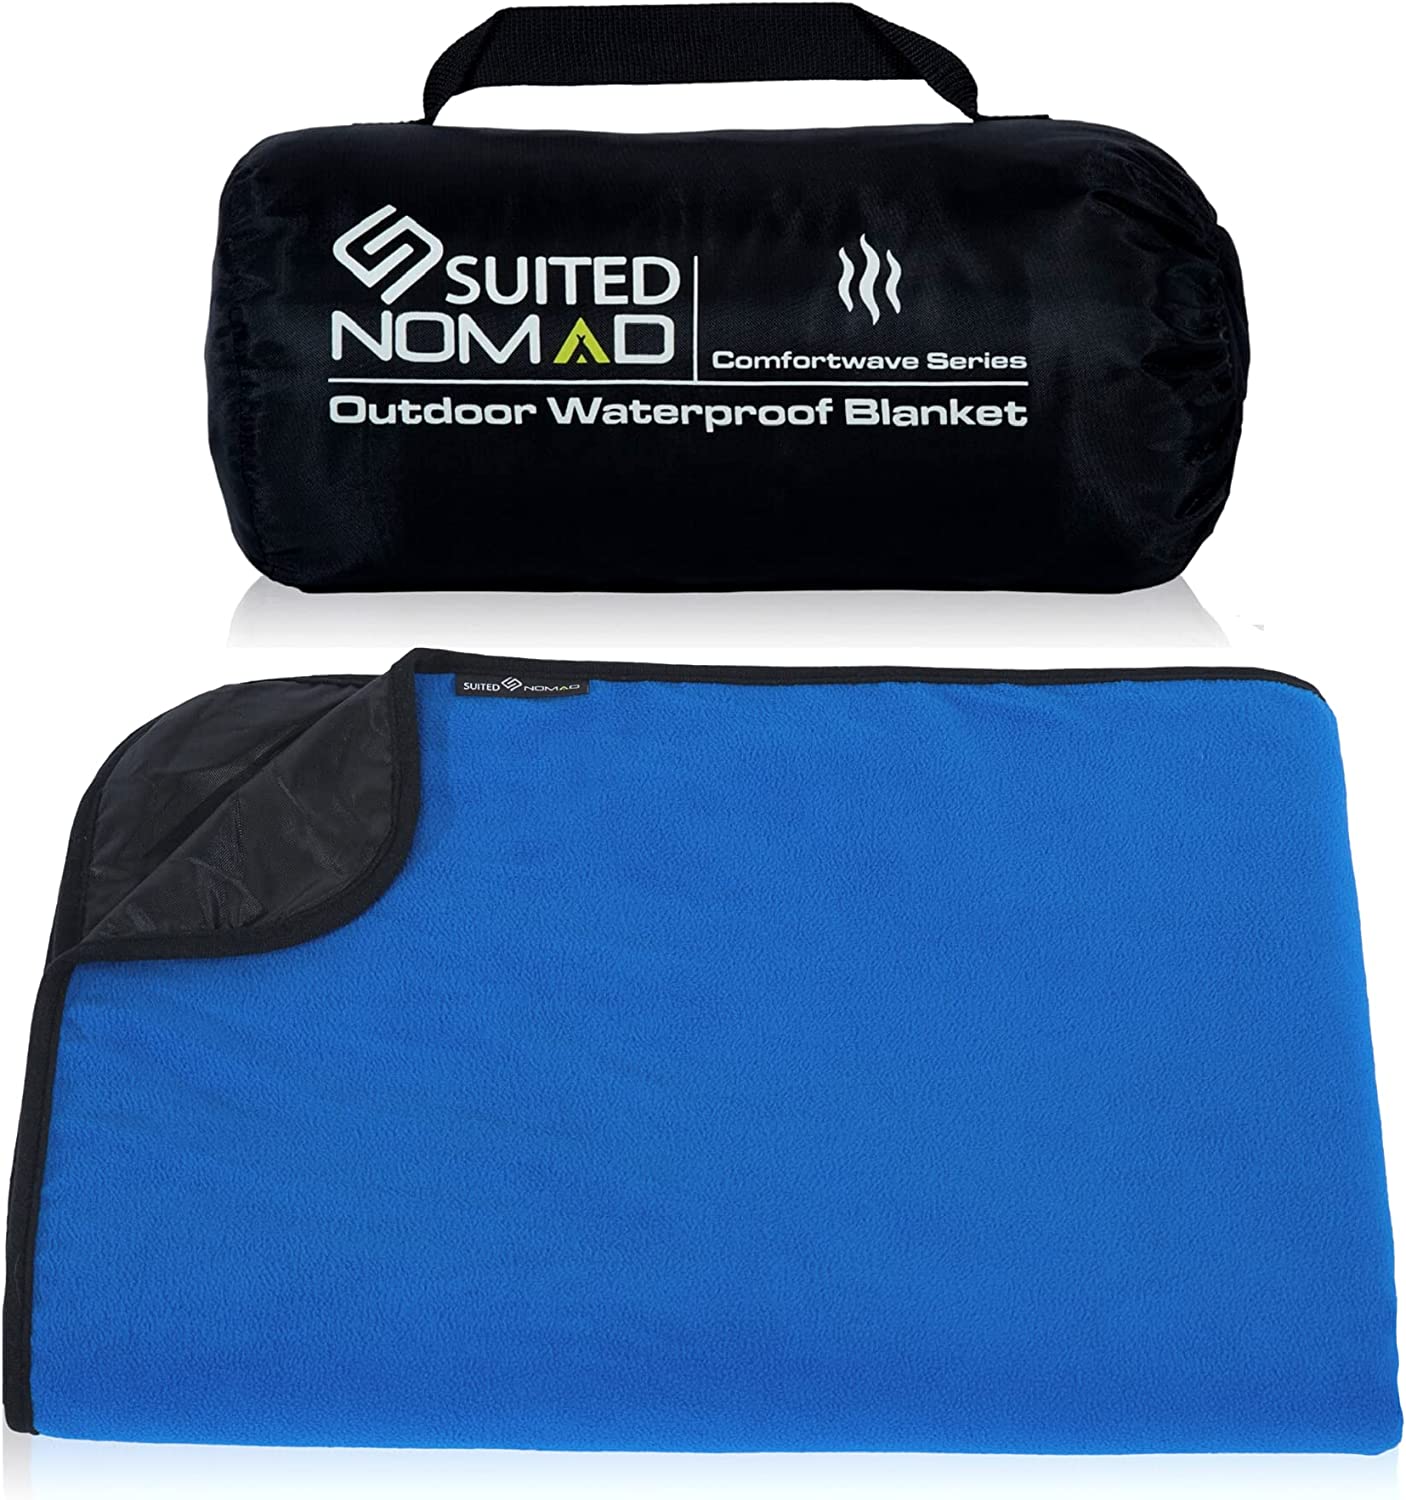 SUITEDNOMAD XL Waterproof Windproof Thick Fleece Outdoor and Stadium Blanket, Compact Warm Double Sided Throw, Great for Cold Weather Camping,Picnic,Sports,Festivals,Dogs, 82×57 in